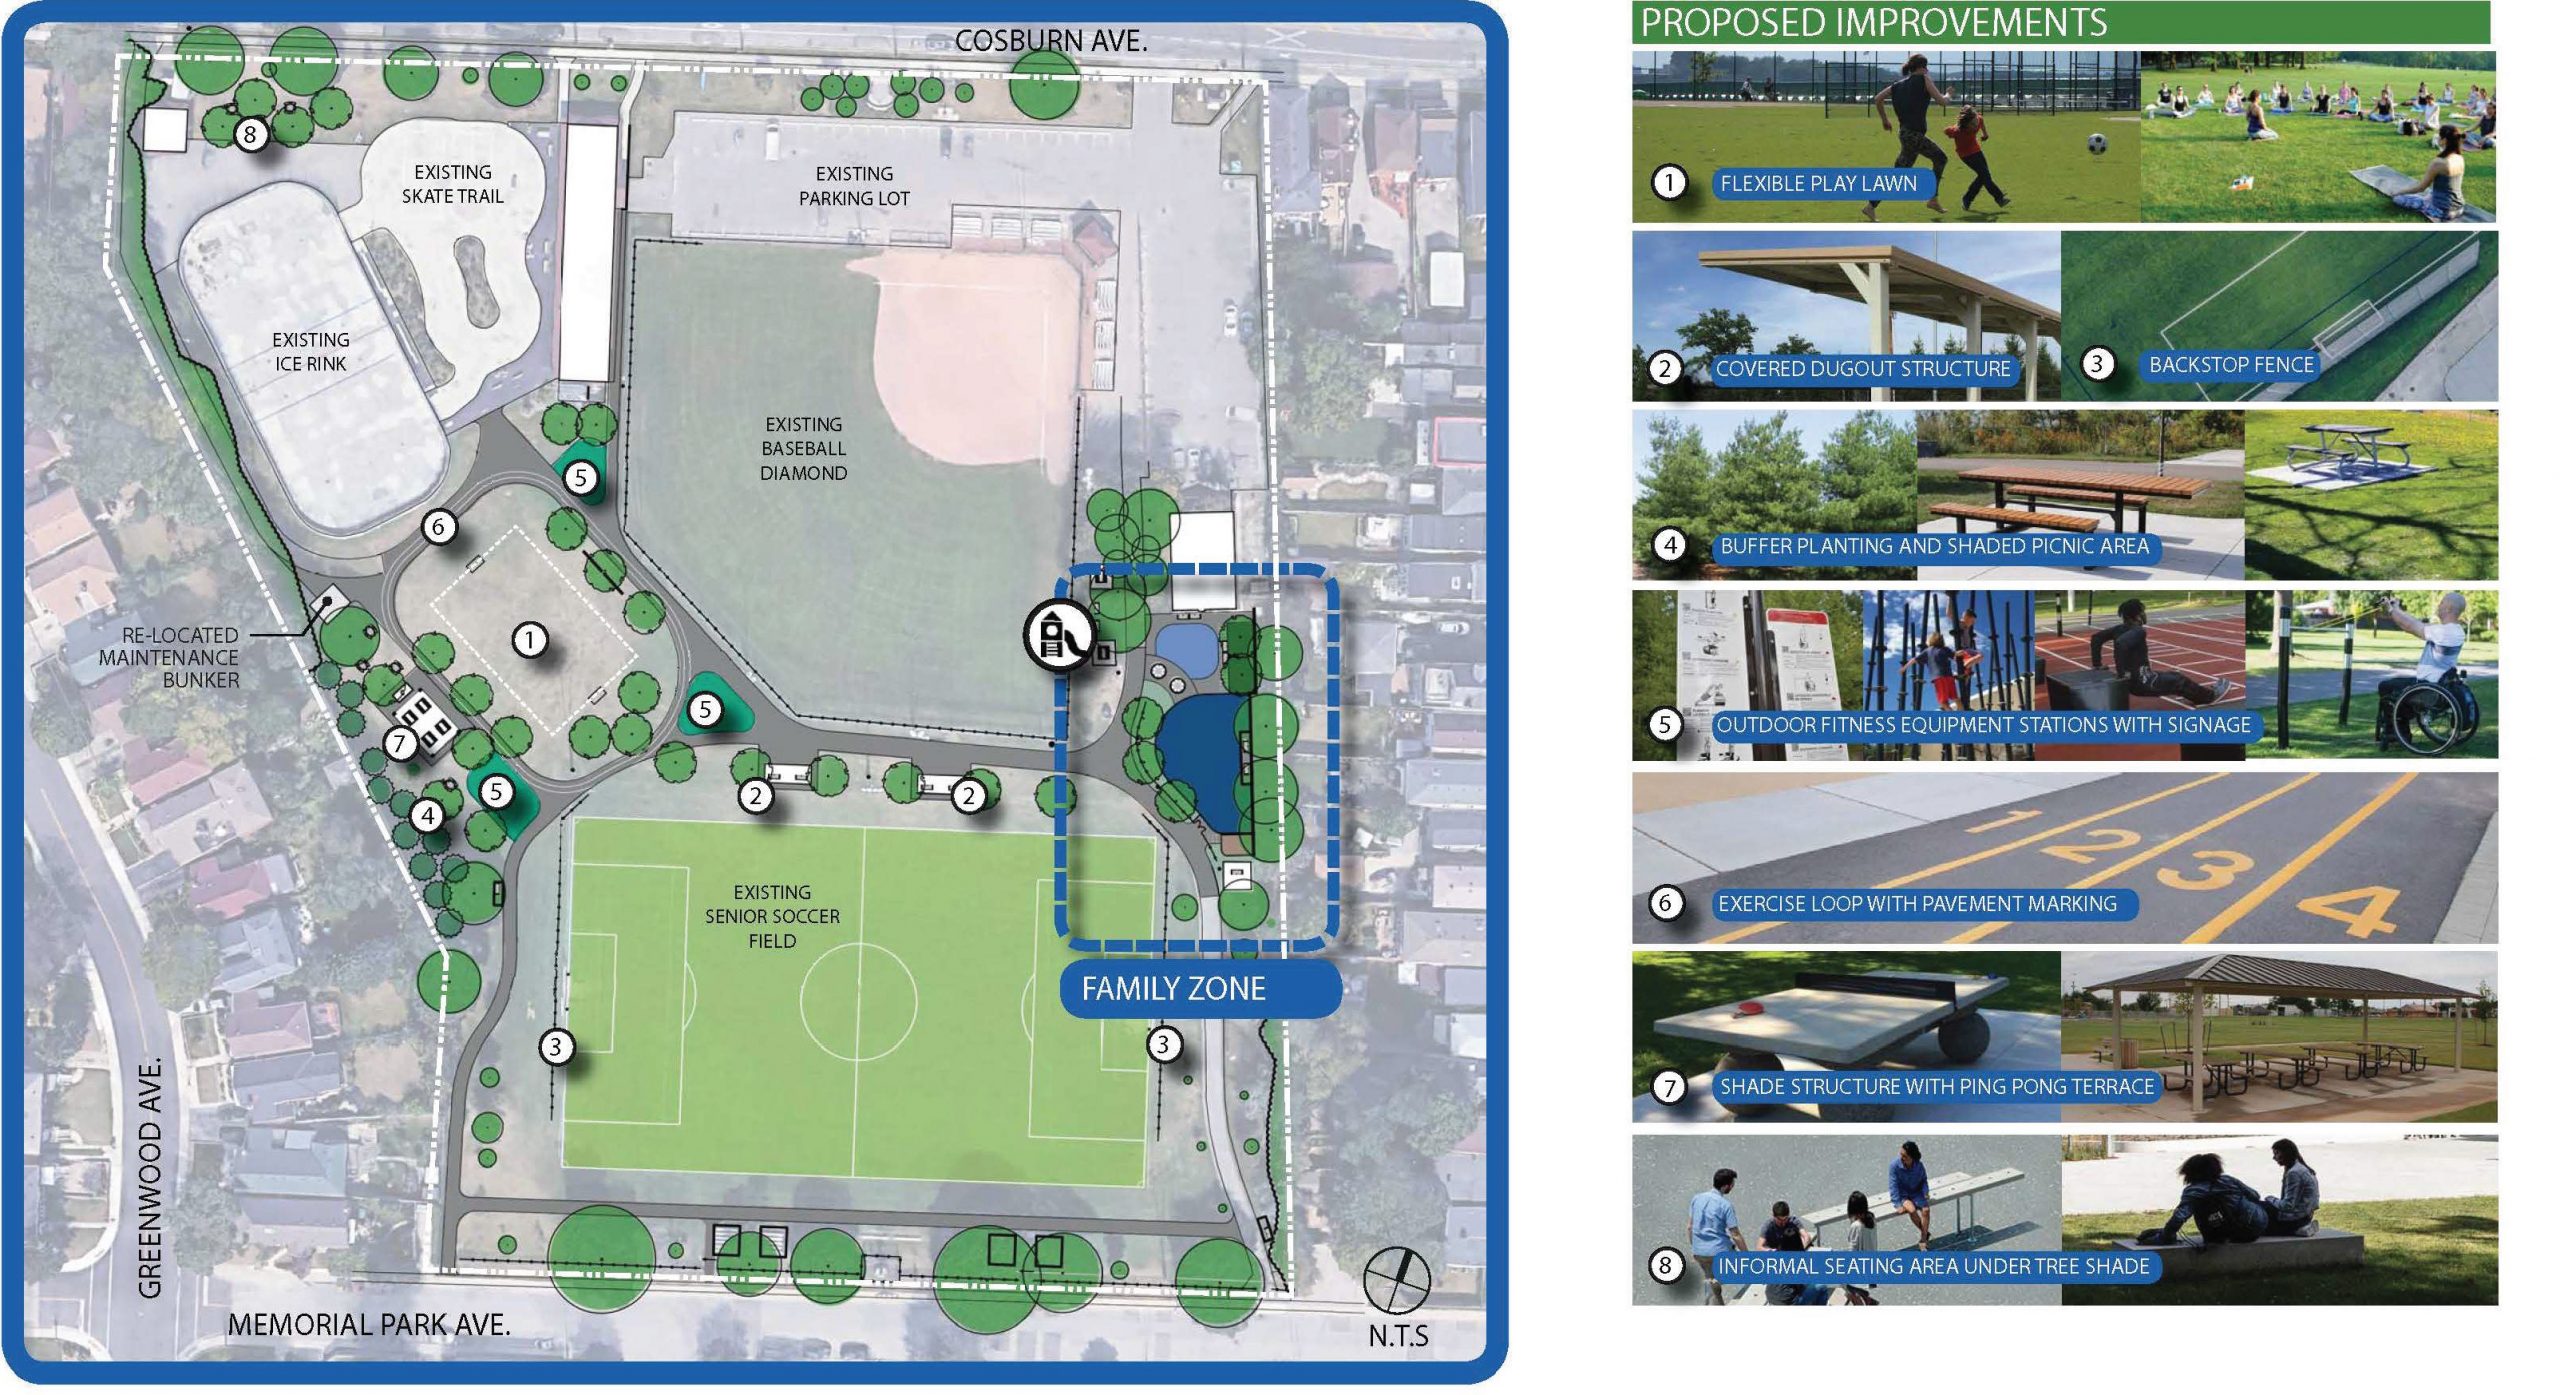 Image of the park improvement plan with 8 key features. 